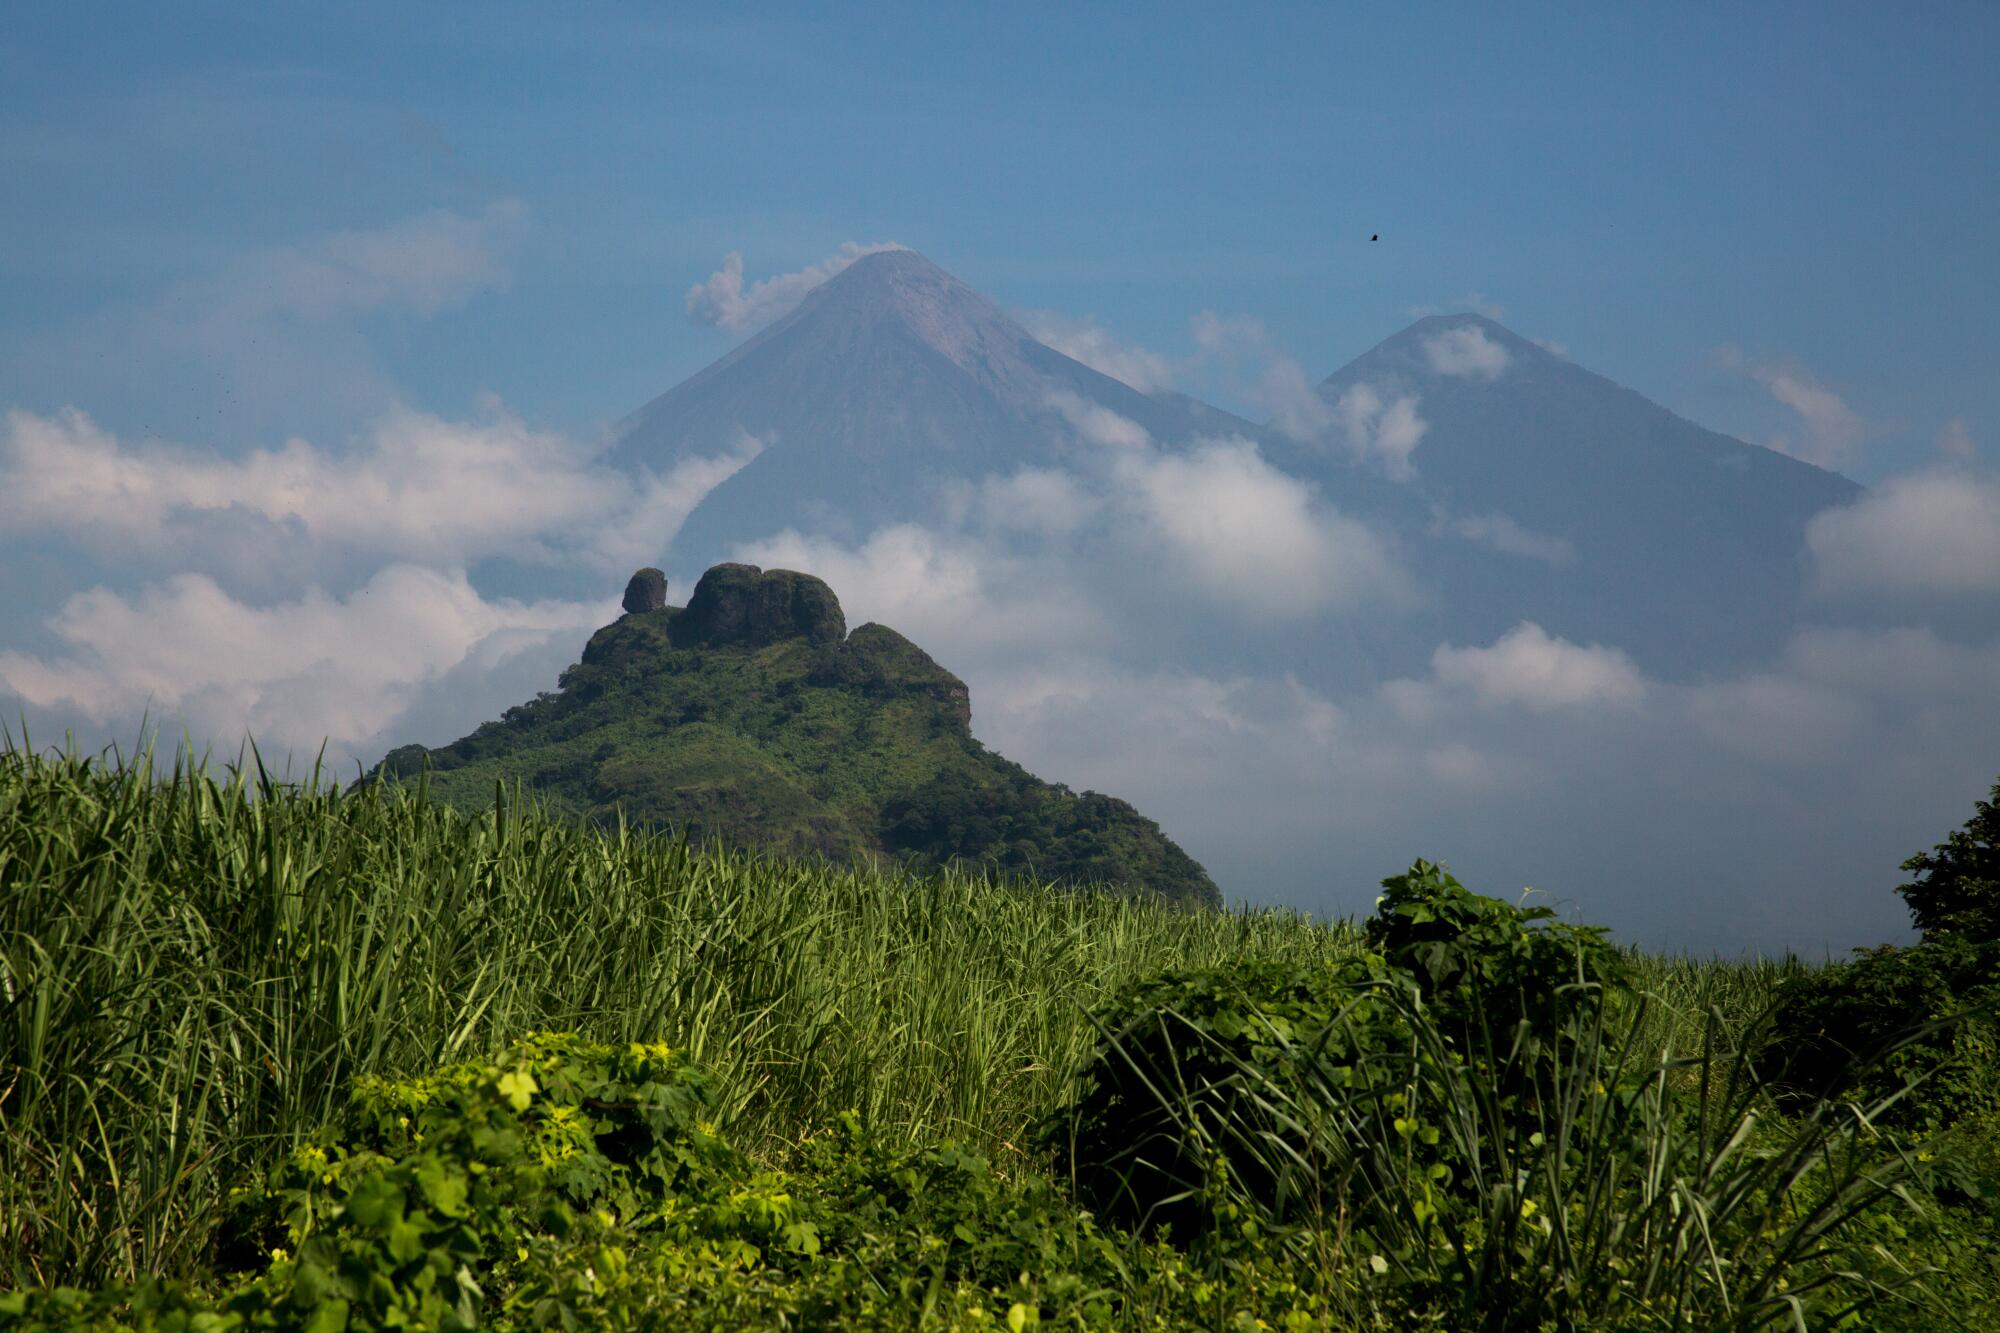 A grassy meadow with an erupting volcano, with two mountains in the background